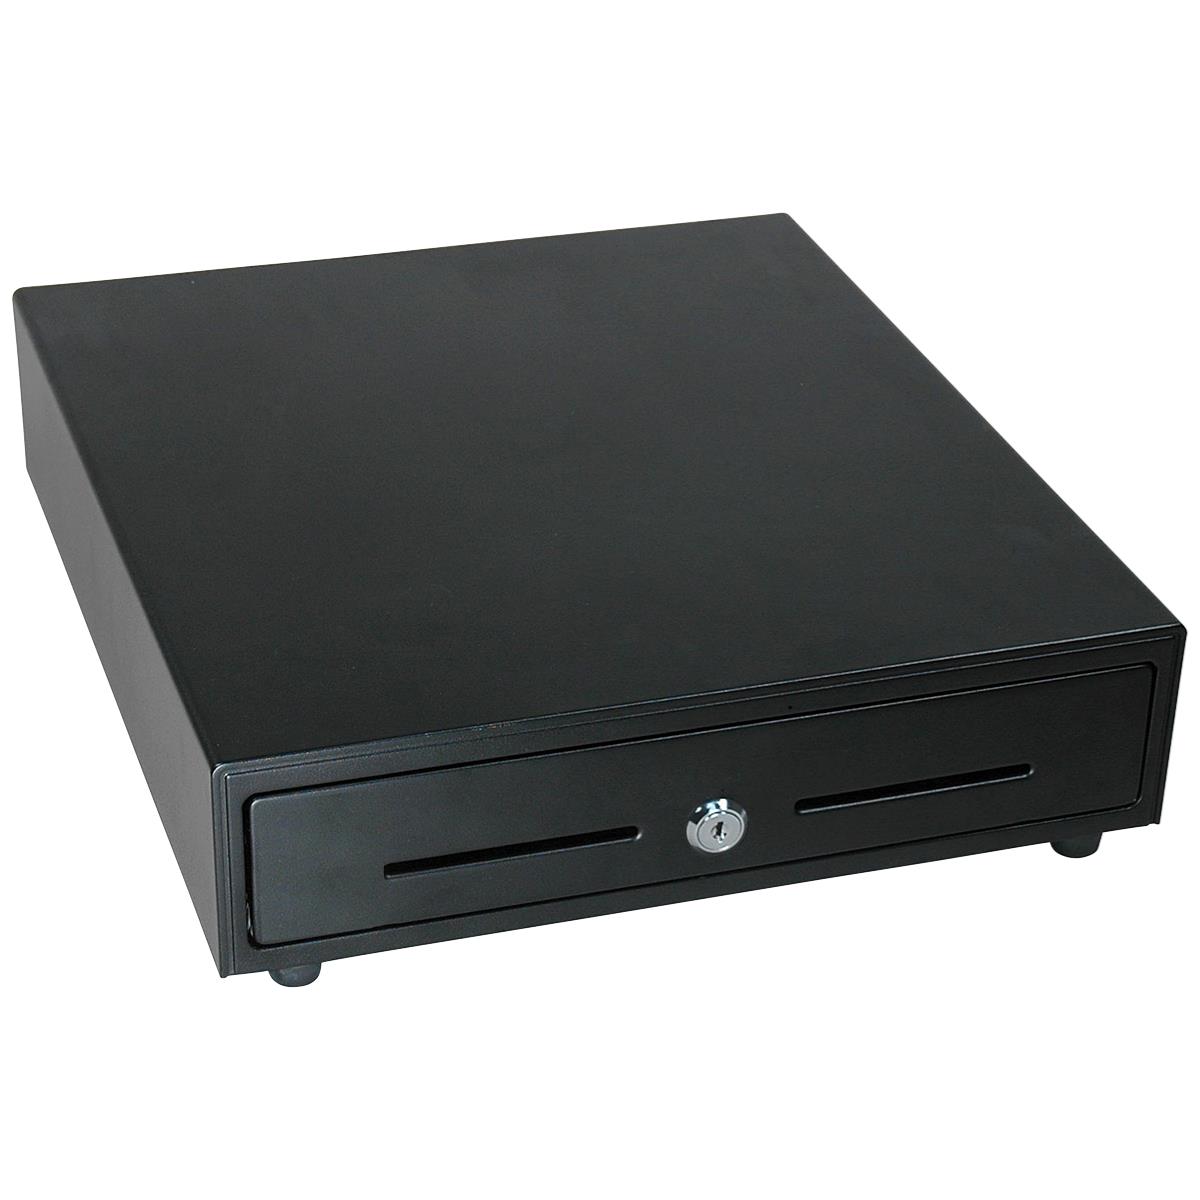 Black metal cash drawer with a single key lock and one slot, isolated on a white background.